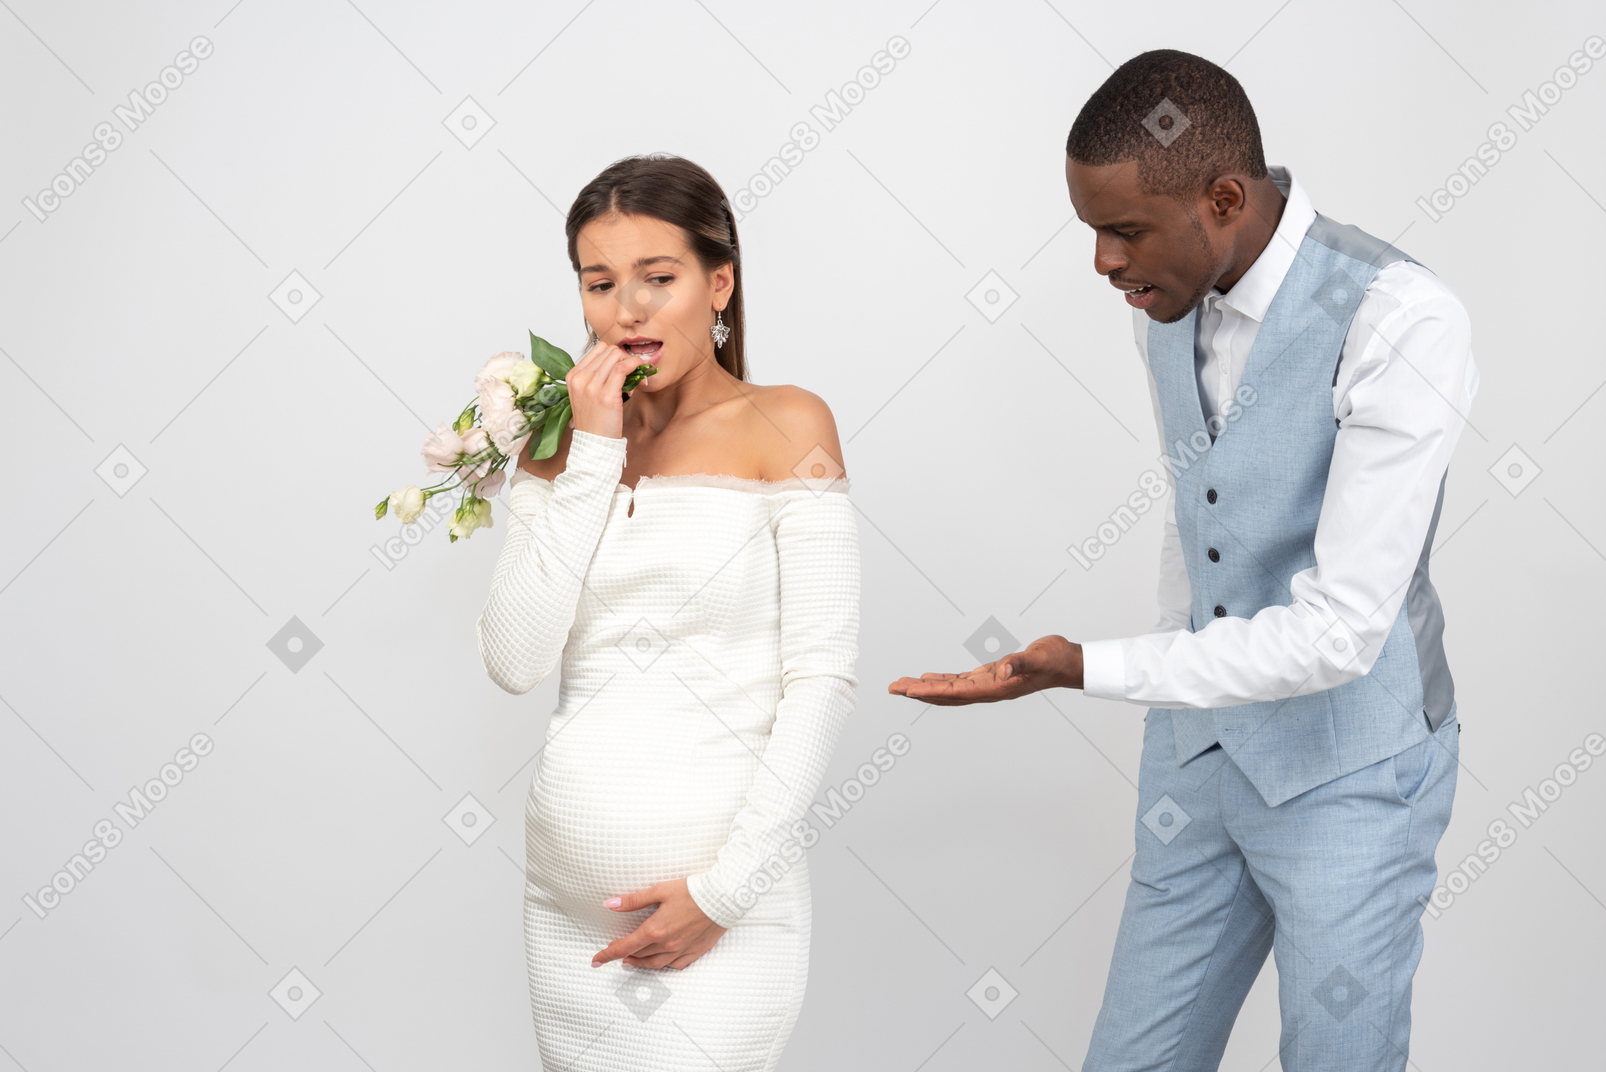 Groom pointing on his bride's belly while she's looking shocked